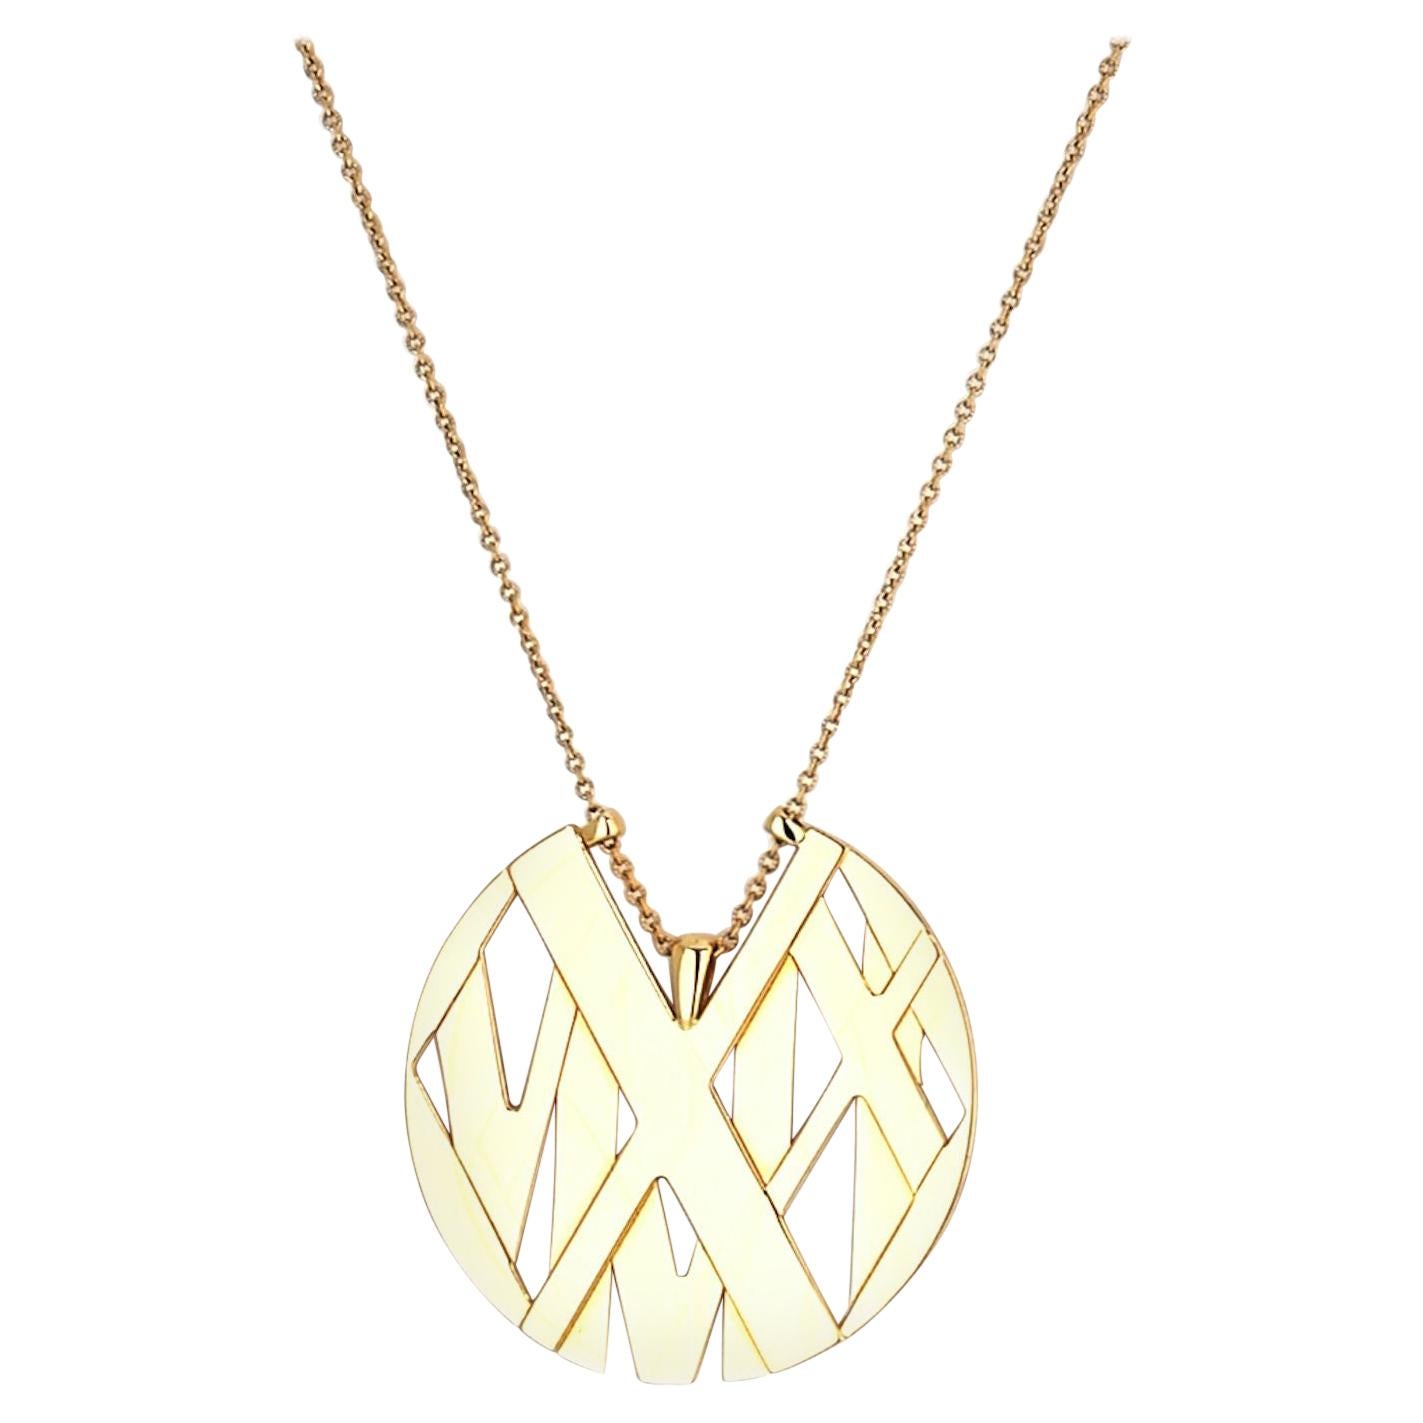 Tiffany & Co. 18k Yellow Gold Atlas Large Model Necklace